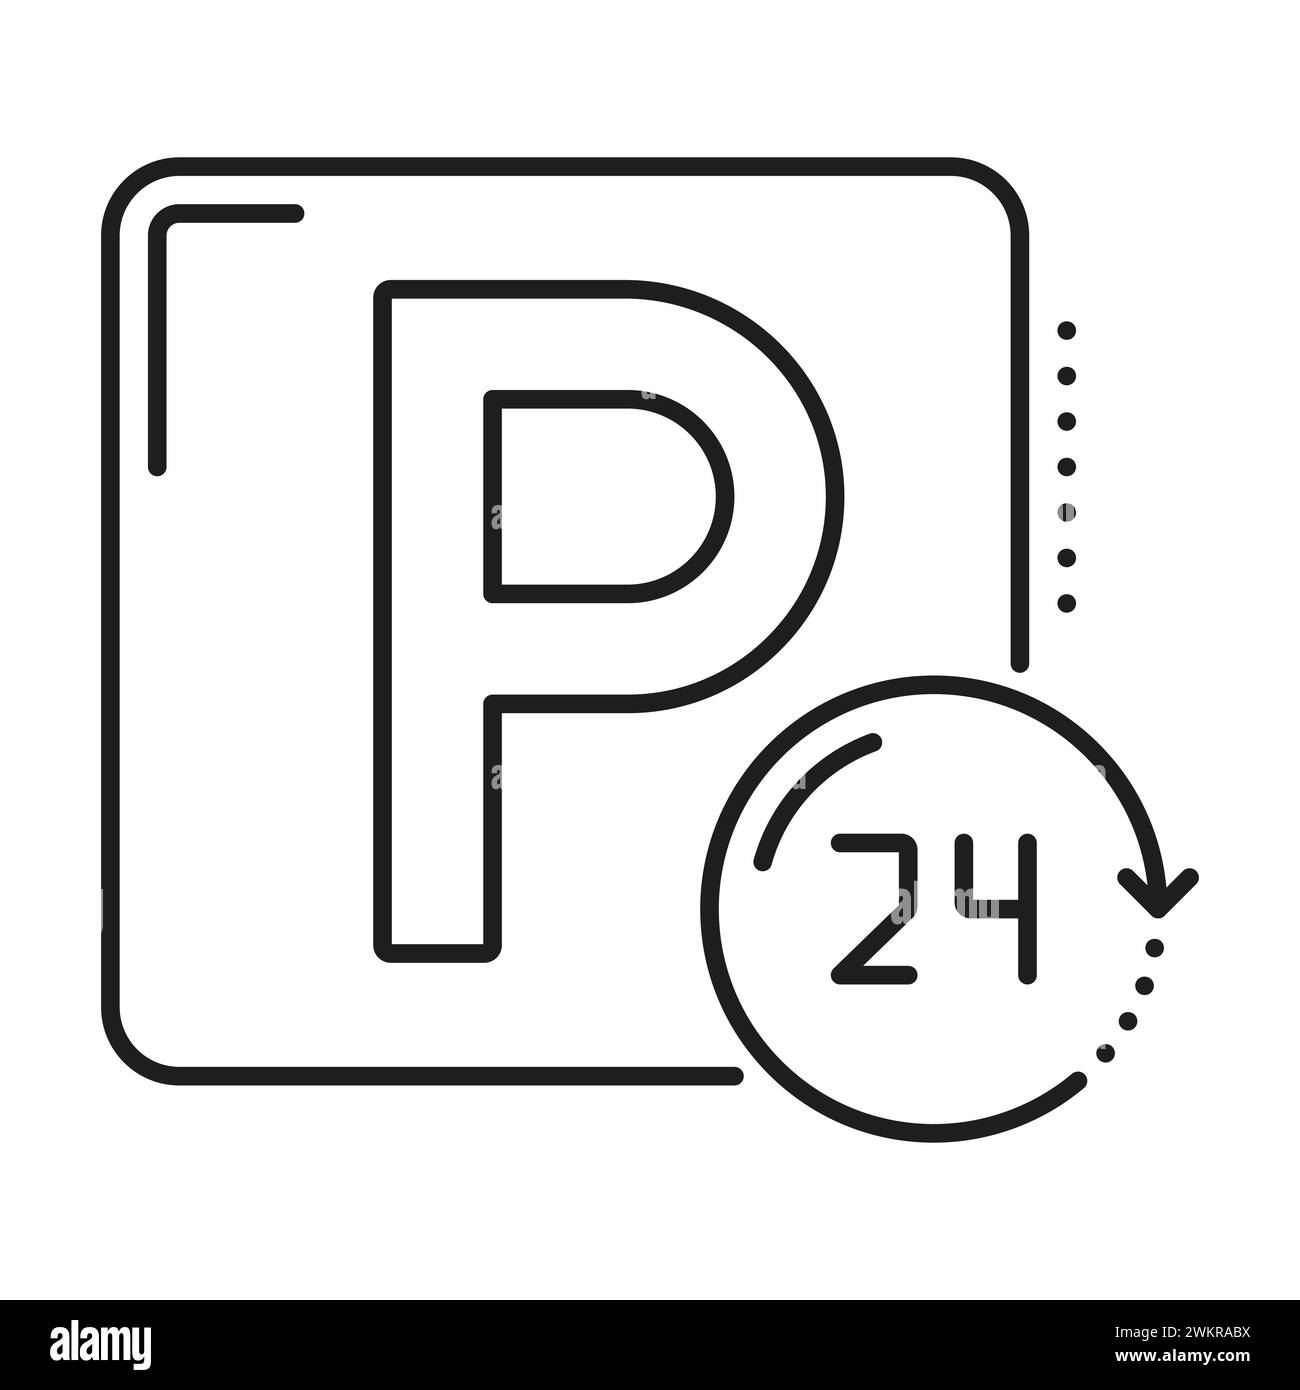 Parking line icon, car park or garage automatic service for 24 hours, vector linear sign. Parking icon for vehicle valet place or public auto garage space lot symbol for smart automatic service app Stock Vector